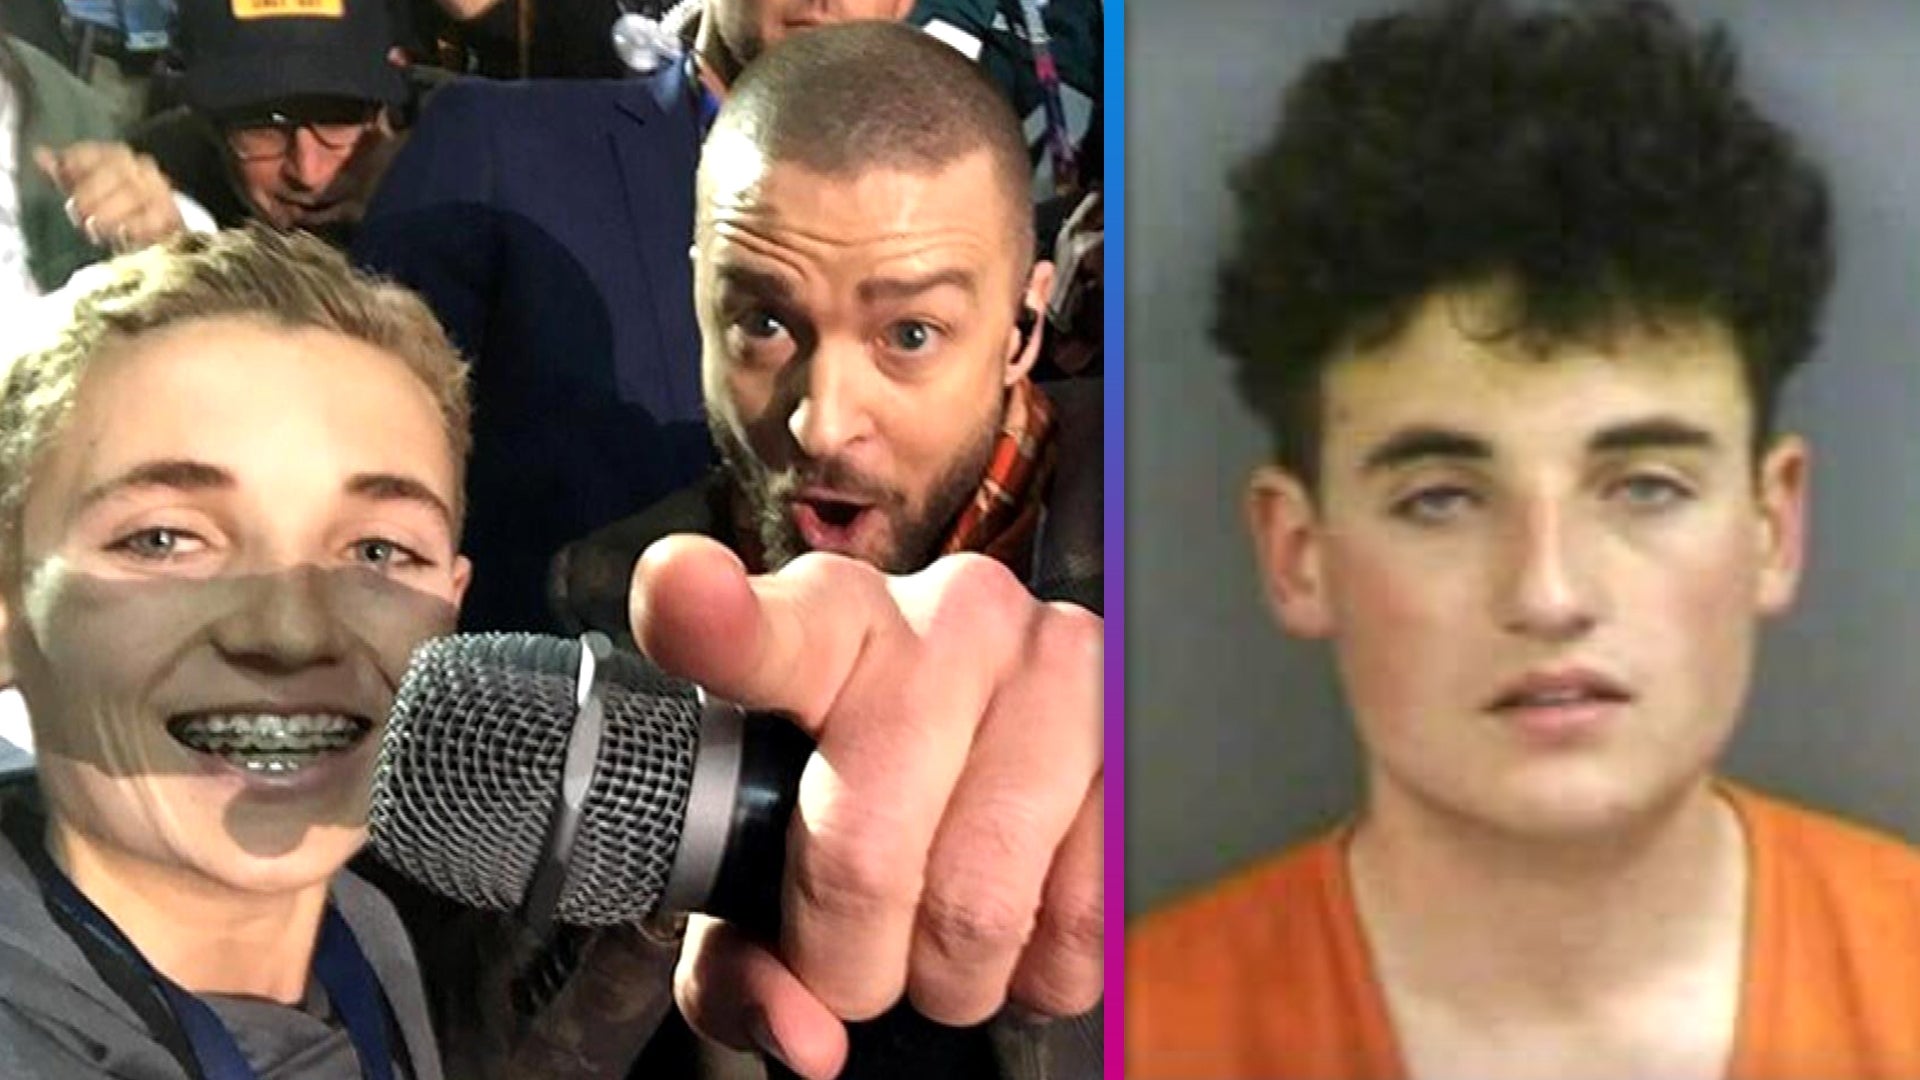 Justin Timberlake's Super Bowl 'Selfie Kid' Arrested in Florida Years After Going Viral